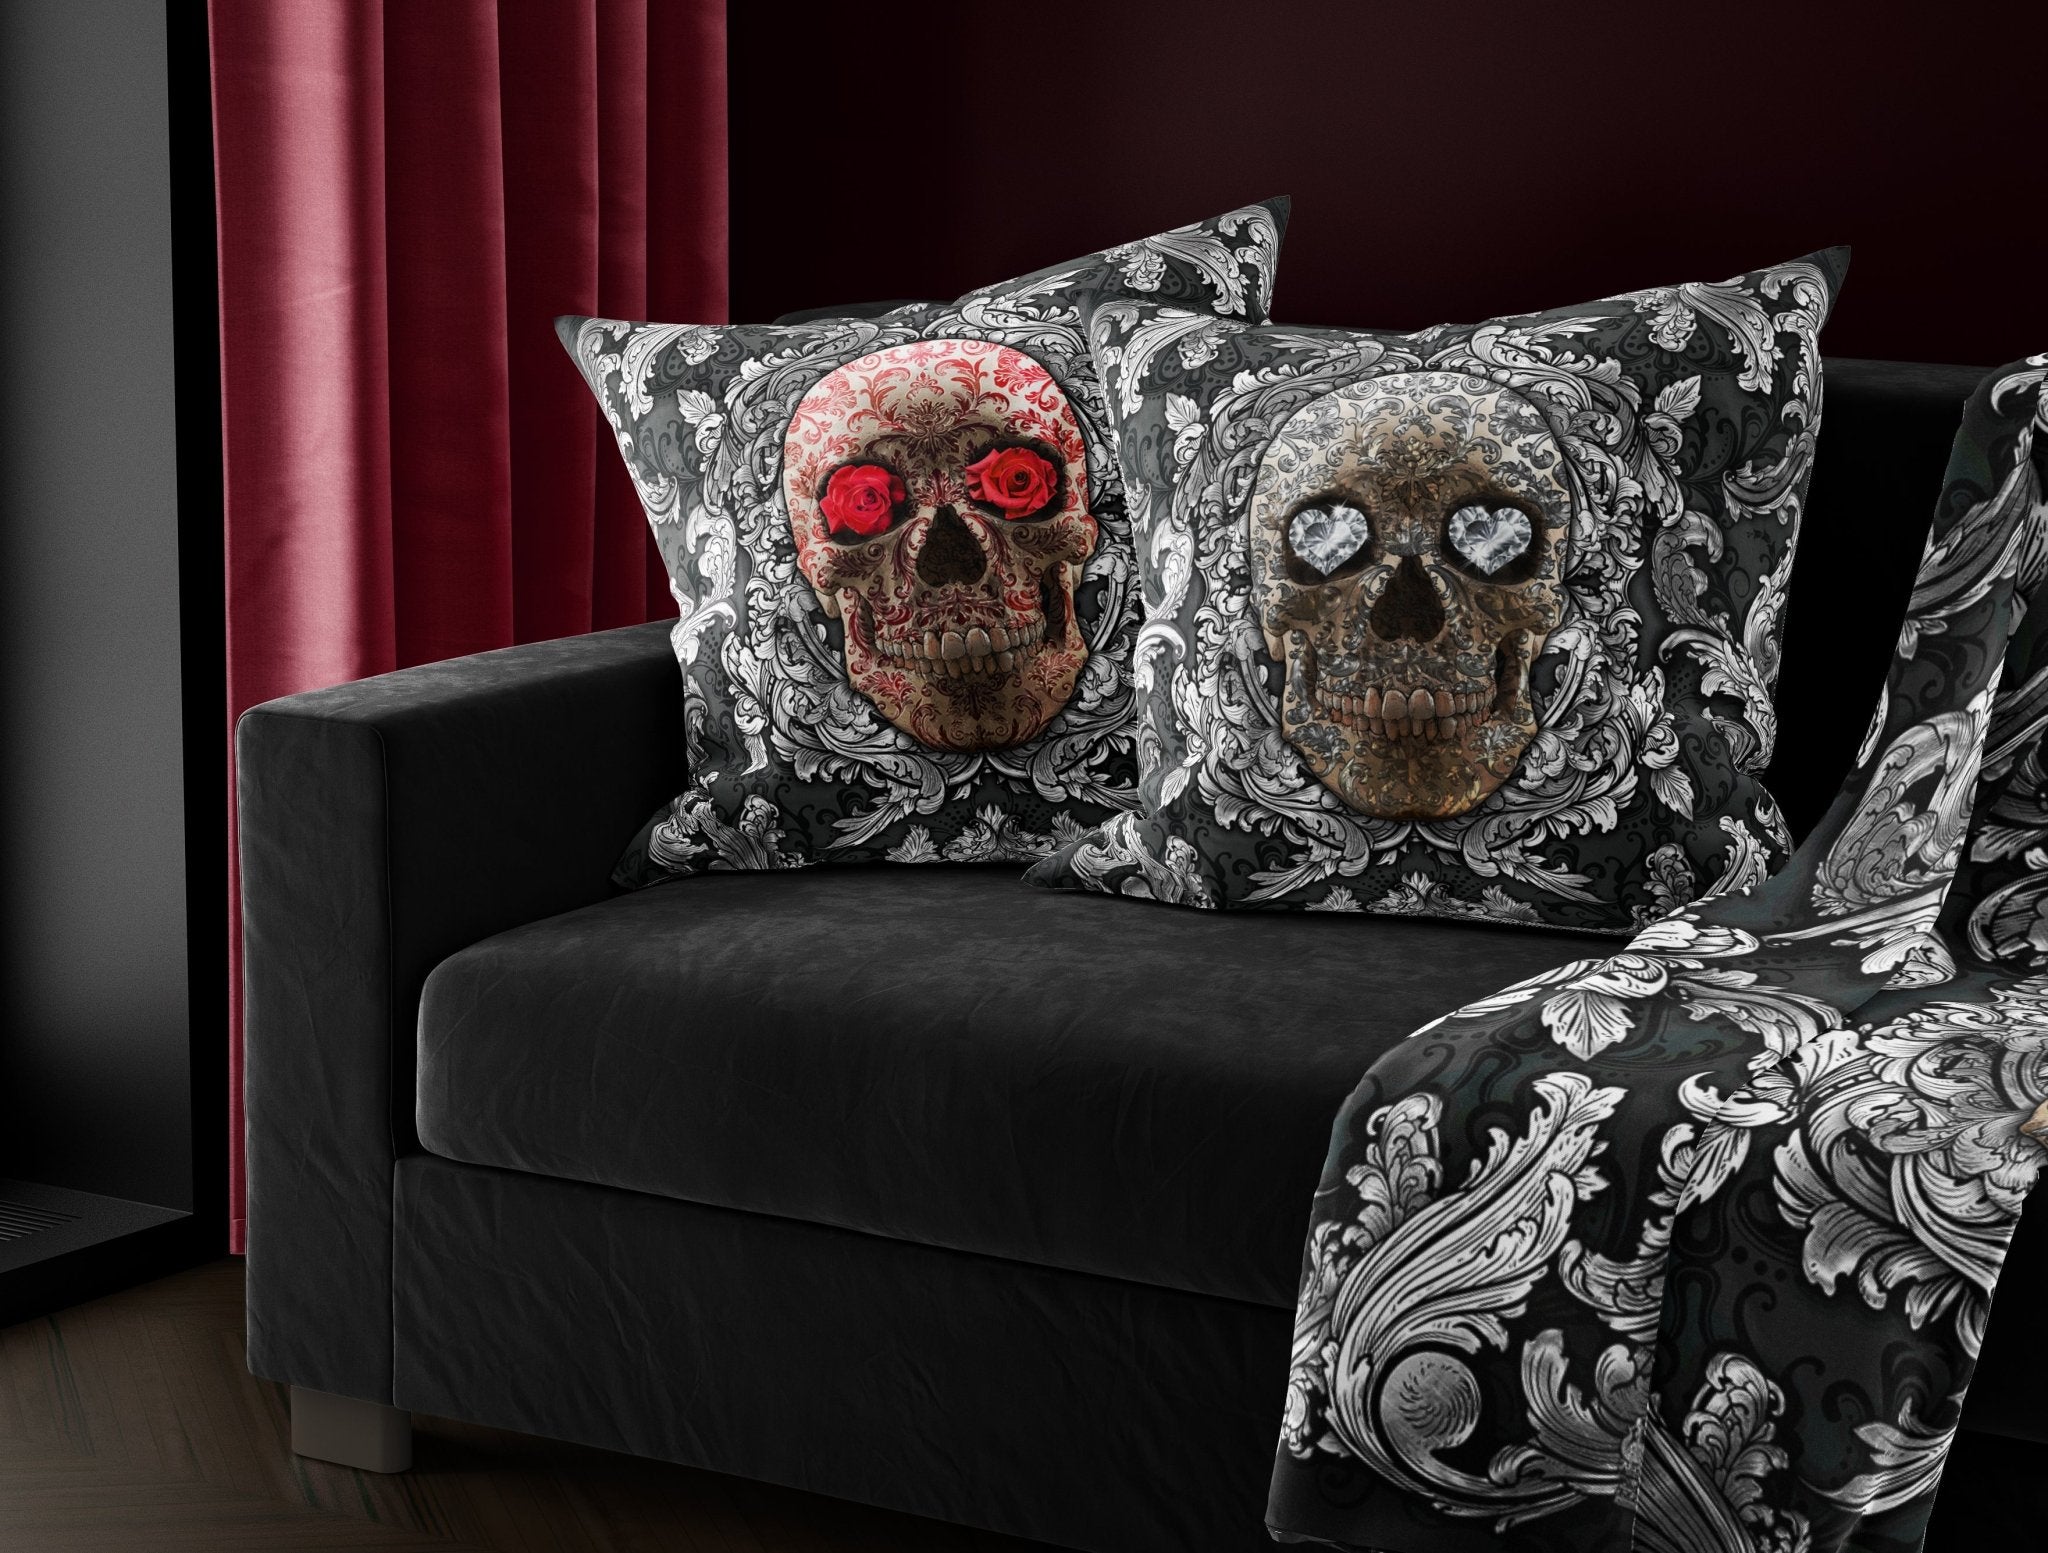 Silver Skull Throw Pillow, Decorative Accent Pillow, Square Cushion Cover, Vintage, Baroque Decor, Macabre Art, Eclectic Home Decor - Red and Black, 2 Colors - Abysm Internal